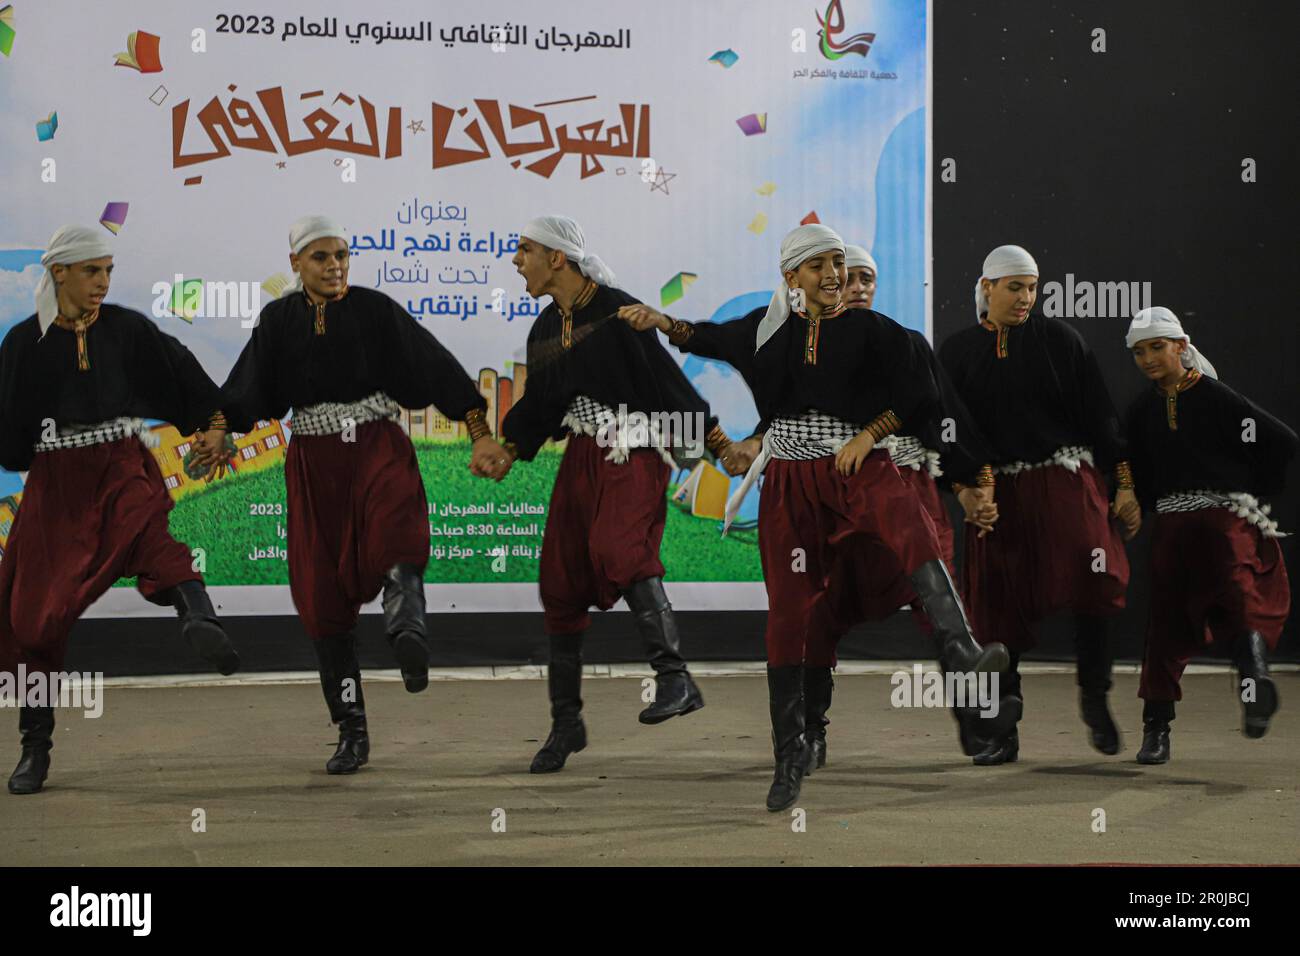 (230509) -- GAZA, May 9, 2023 (Xinhua) -- Students perform during a cultural event at the Culture and Free Thought Association in the southern Gaza Strip city of Khan Younis, on May 8, 2023. Dozens of children on Monday in the Gaza Strip took part in a cultural event aimed at encouraging their peers to read and learn. 'This event was organized as part of an integrated program of cultural activities dedicated to children in order to encourage them to read and learn,' Mariam Zaqout, General Director of the Culture and Free Thought Association (CFTA), the sponsor and organizer, told Xinhua. (Phot Stock Photo